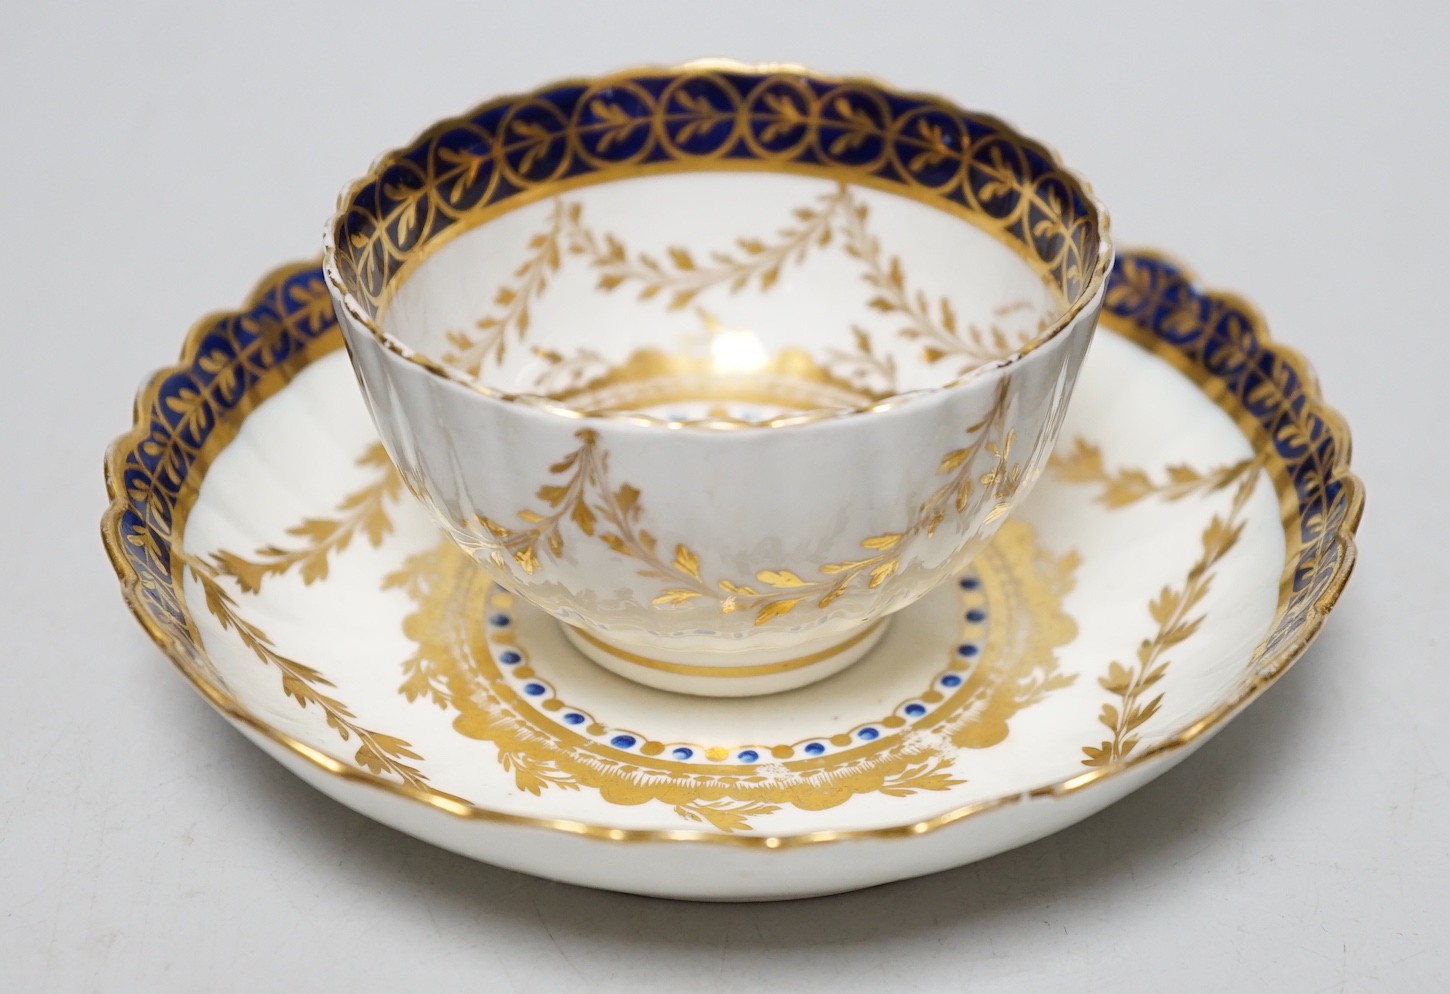 An 18th century Caughley rare teabowl and saucer painted with a crest of an arm clutching a dragon encircled by three gilt borders, 6cm tall overall